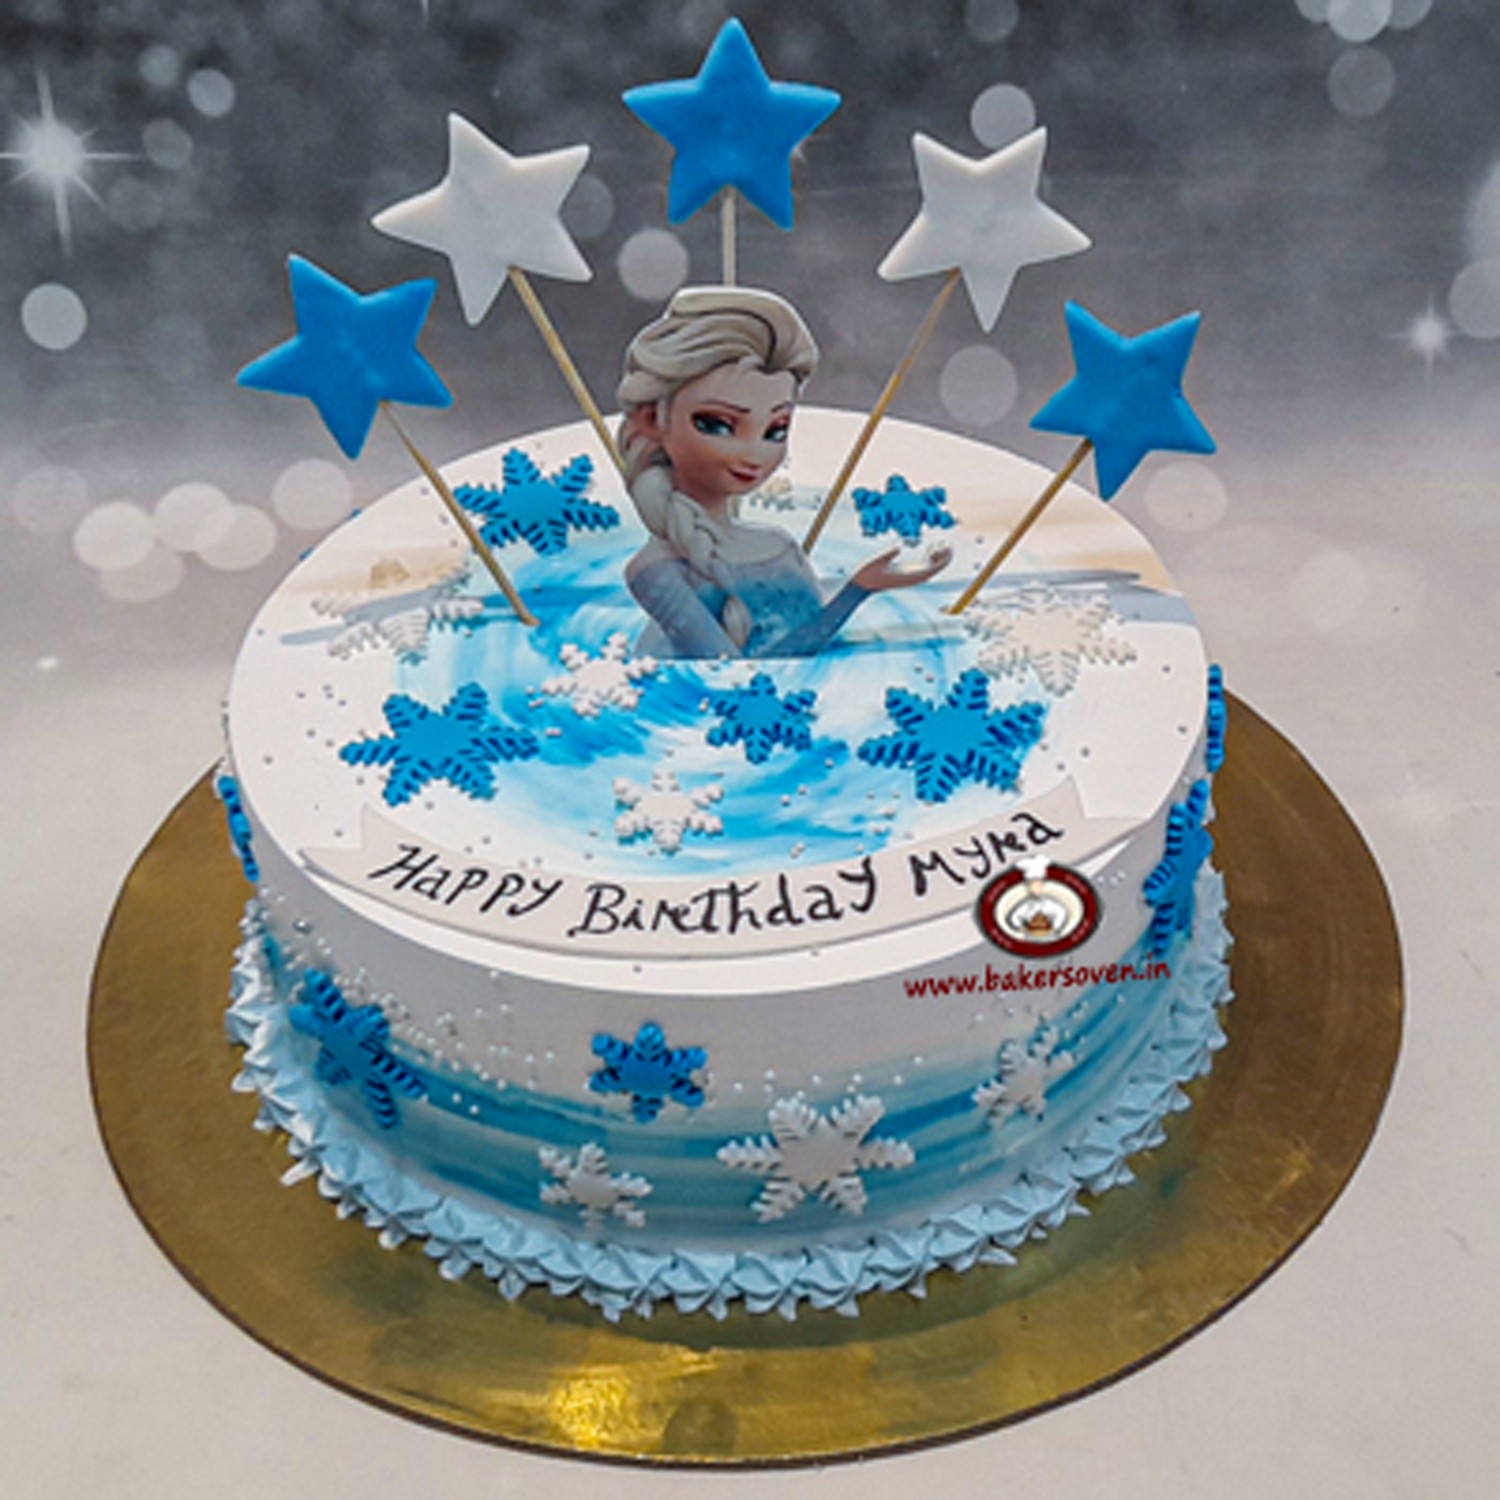 8 Frozen Birthday Cakes to Make at Home plus Some Showstoppers